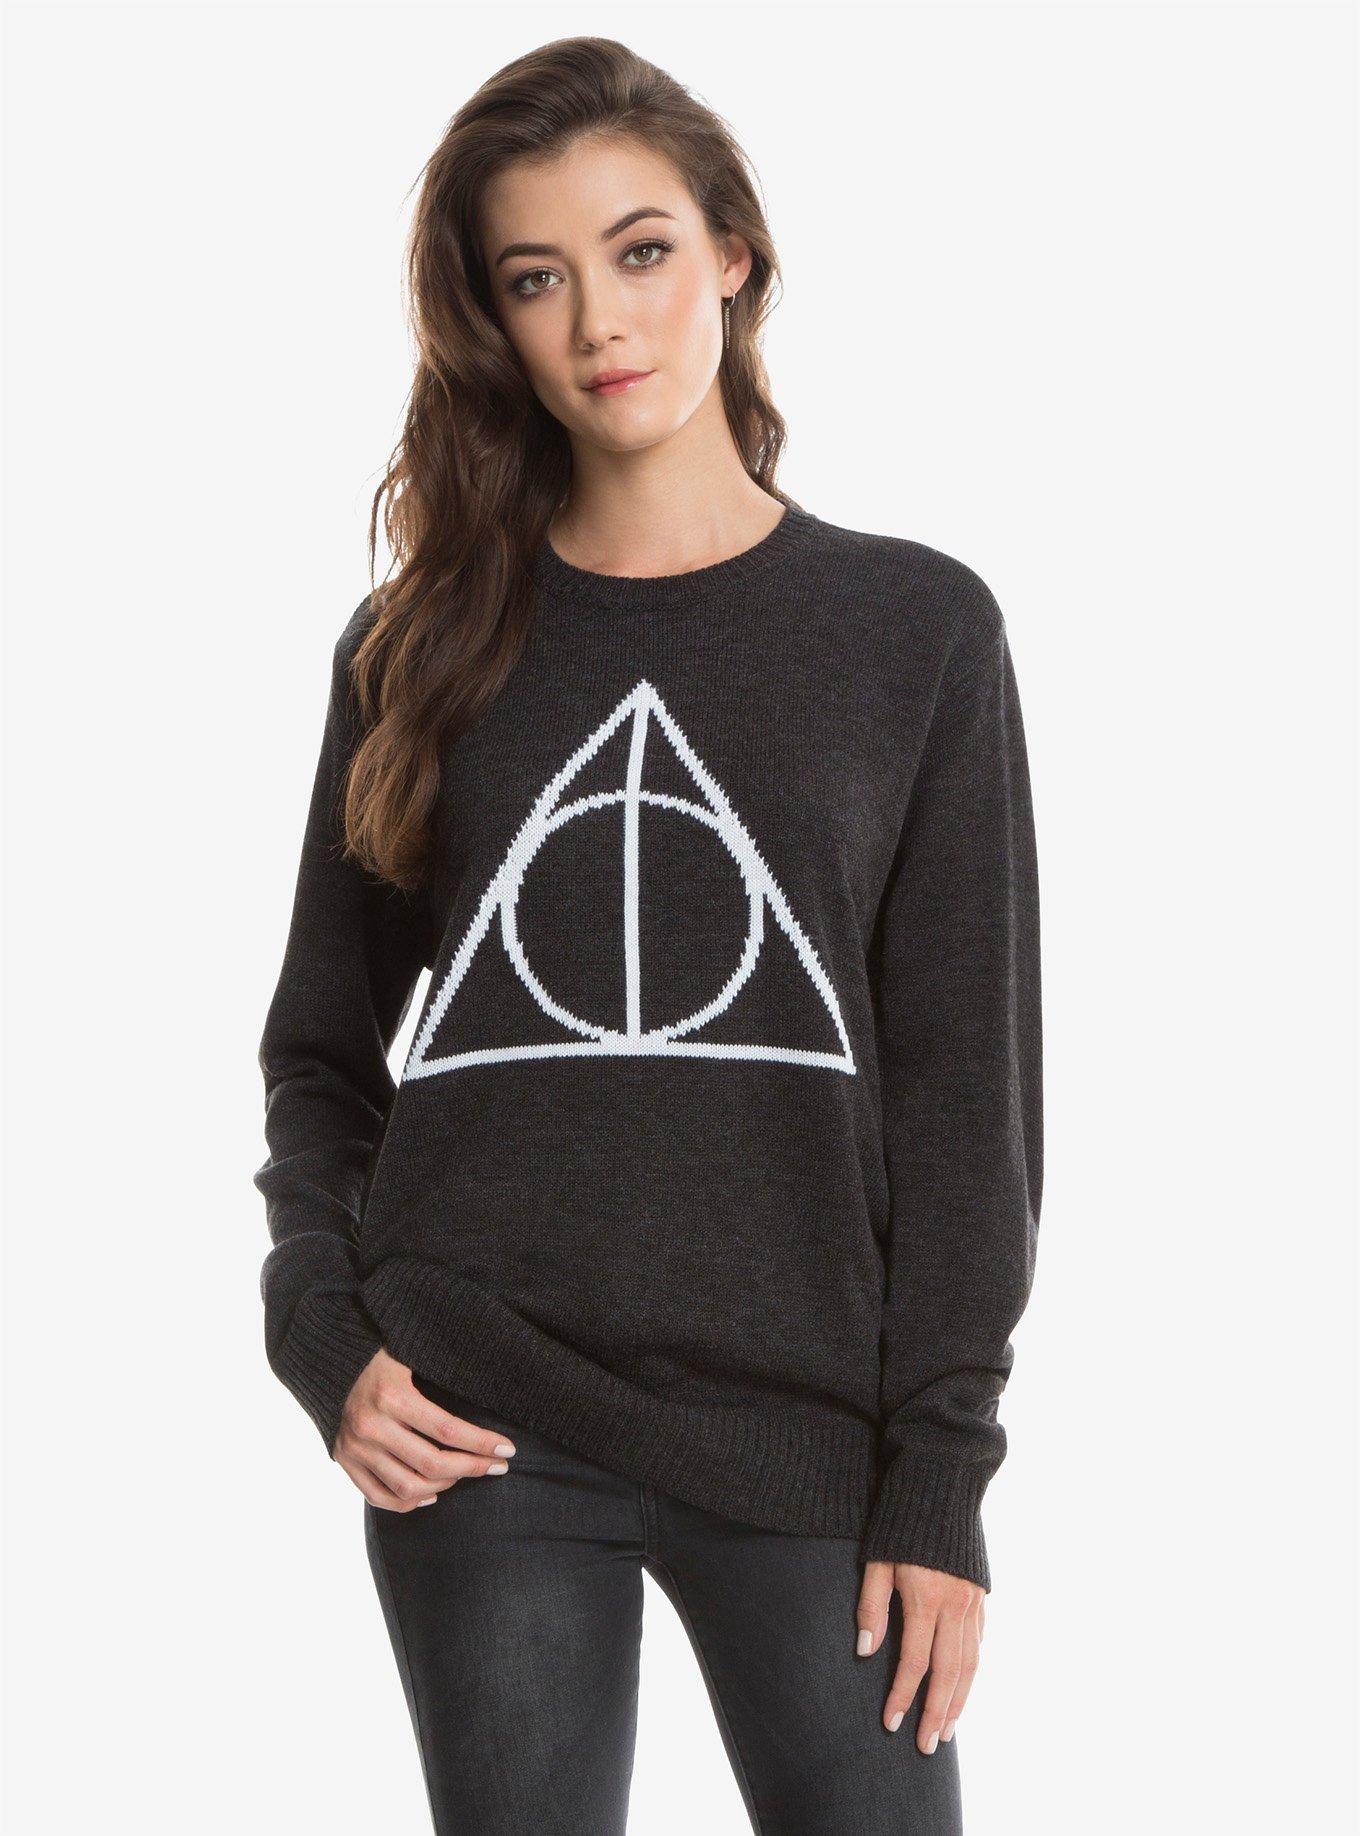 Harry Potter Deathly Hallows Womens Intarsia Pullover Sweater, BLACK-WHITE, hi-res